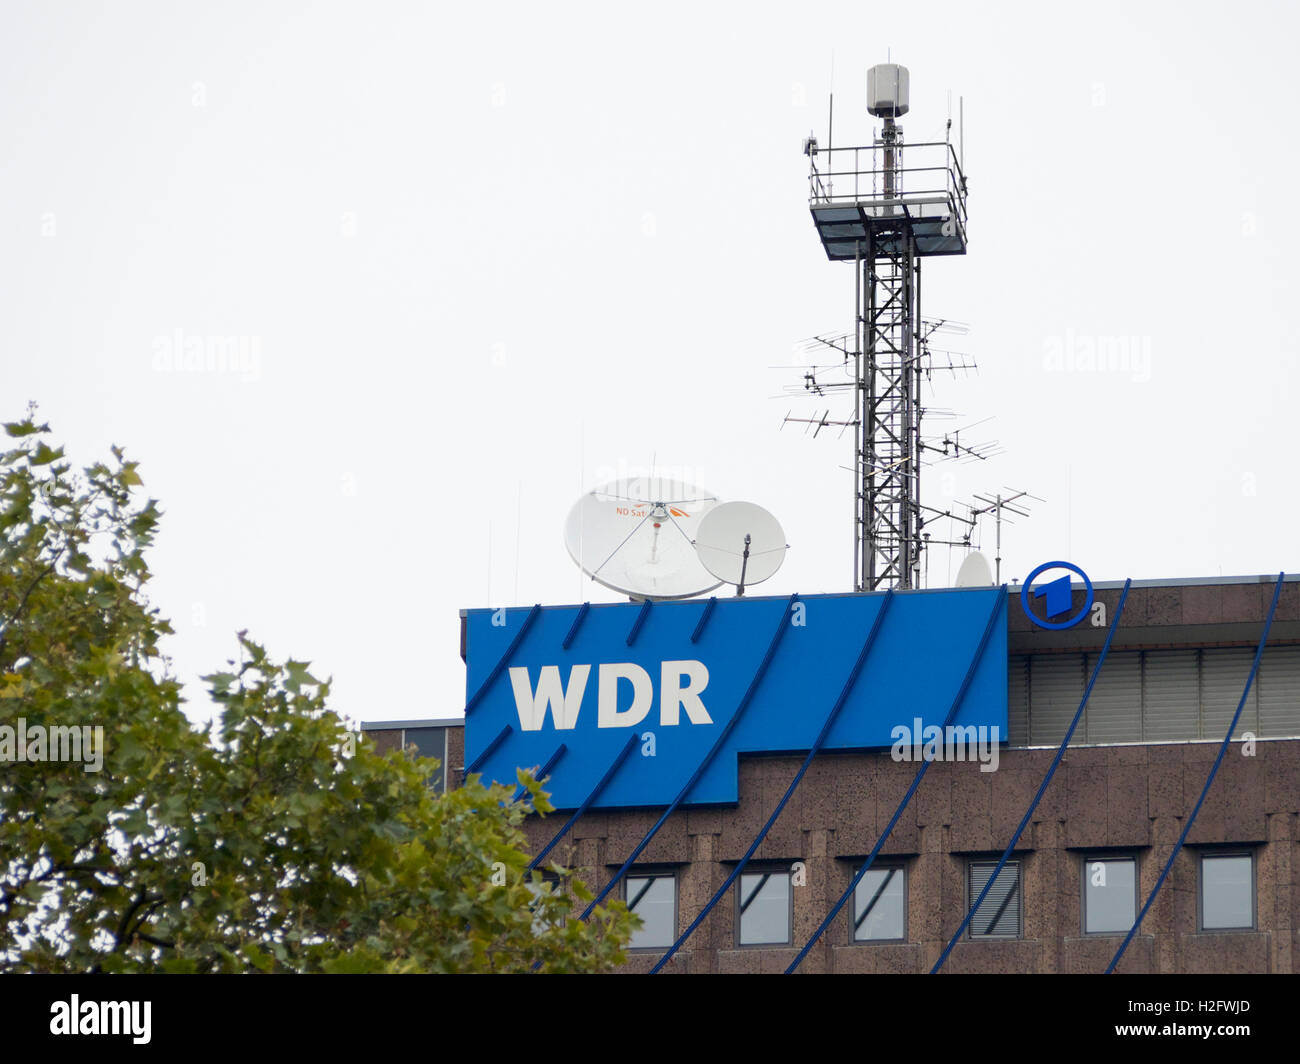 WDR west deutsche rundfunk TV station logo with satellite dishes and antenna tower. Cologne, Germany Stock Photo